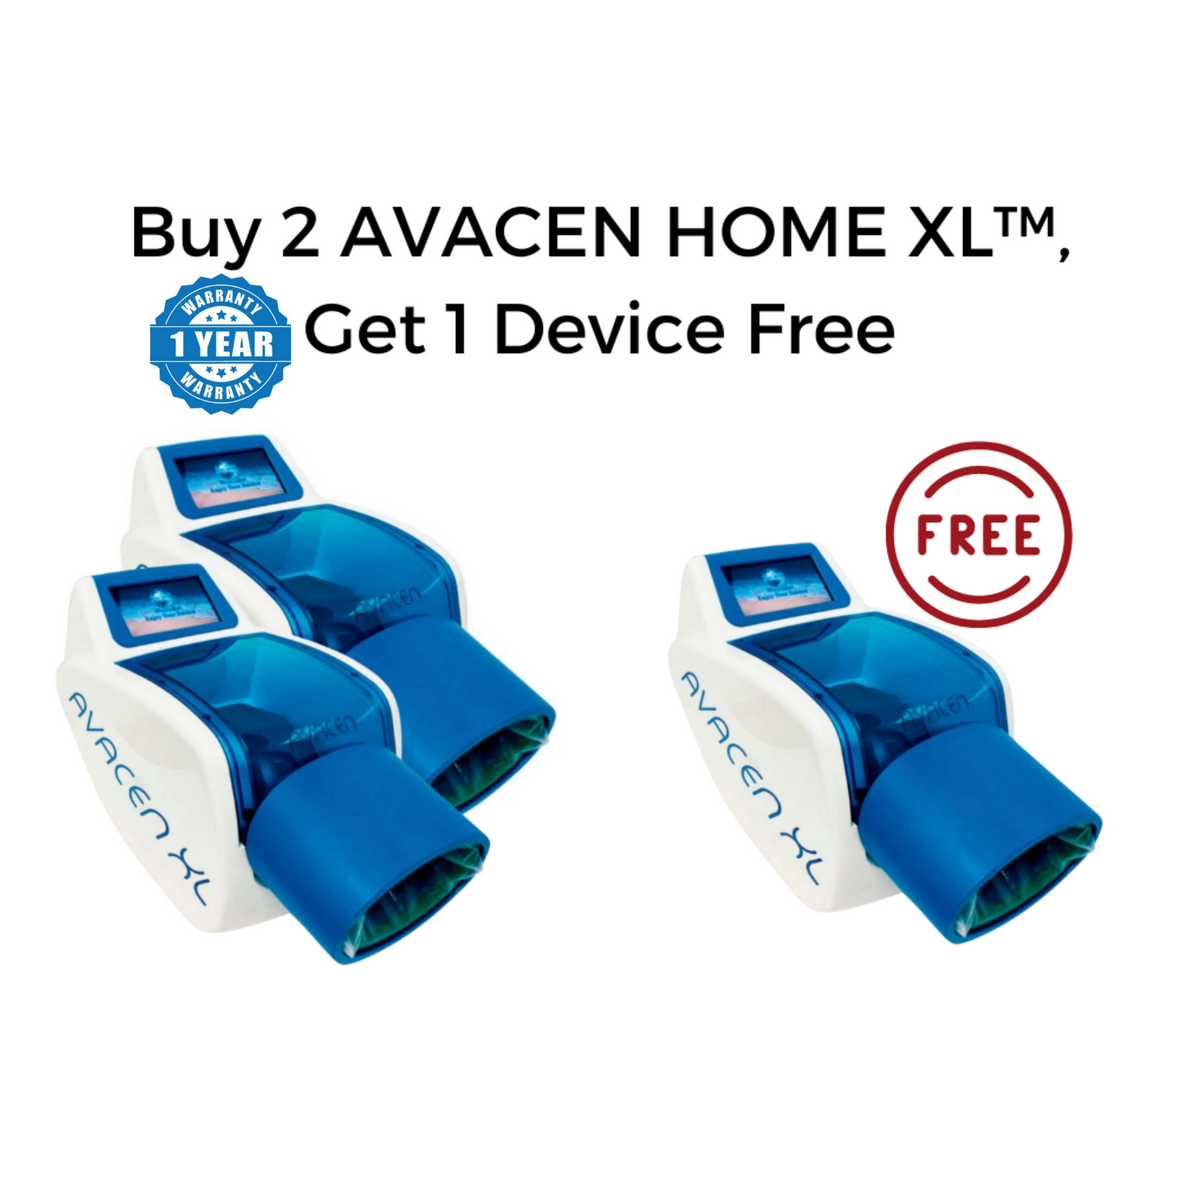 Buy Two AVACEN HOME XL™, Get One Free